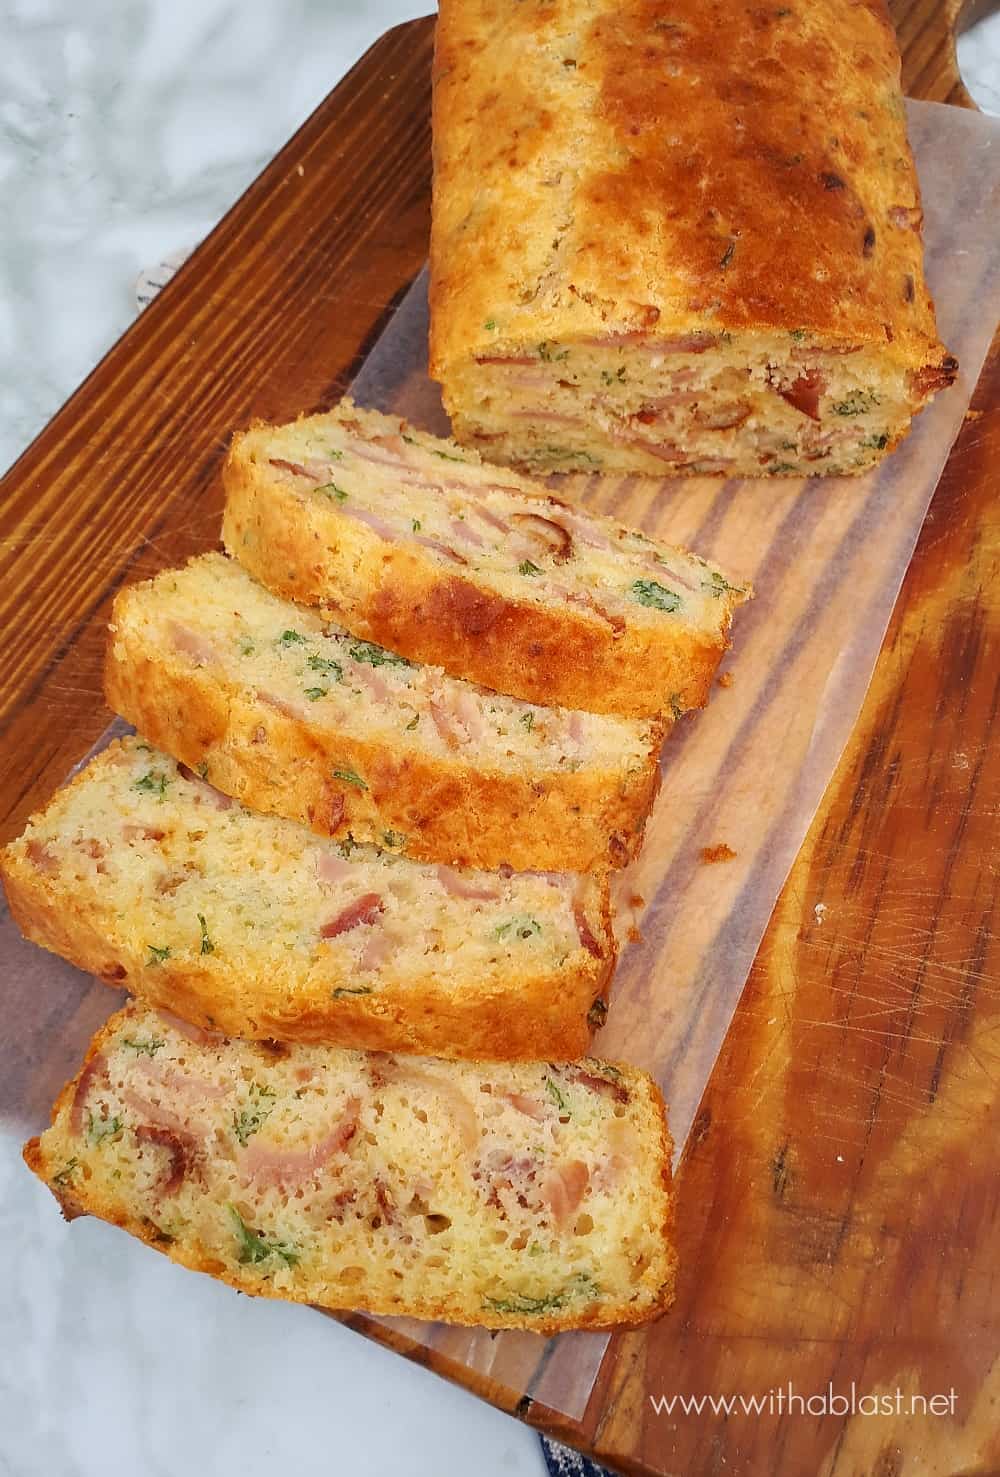 Very tasty quick Bacon and Cheese Bread recipe which can be served as a snack or as an addition to a savory party platter